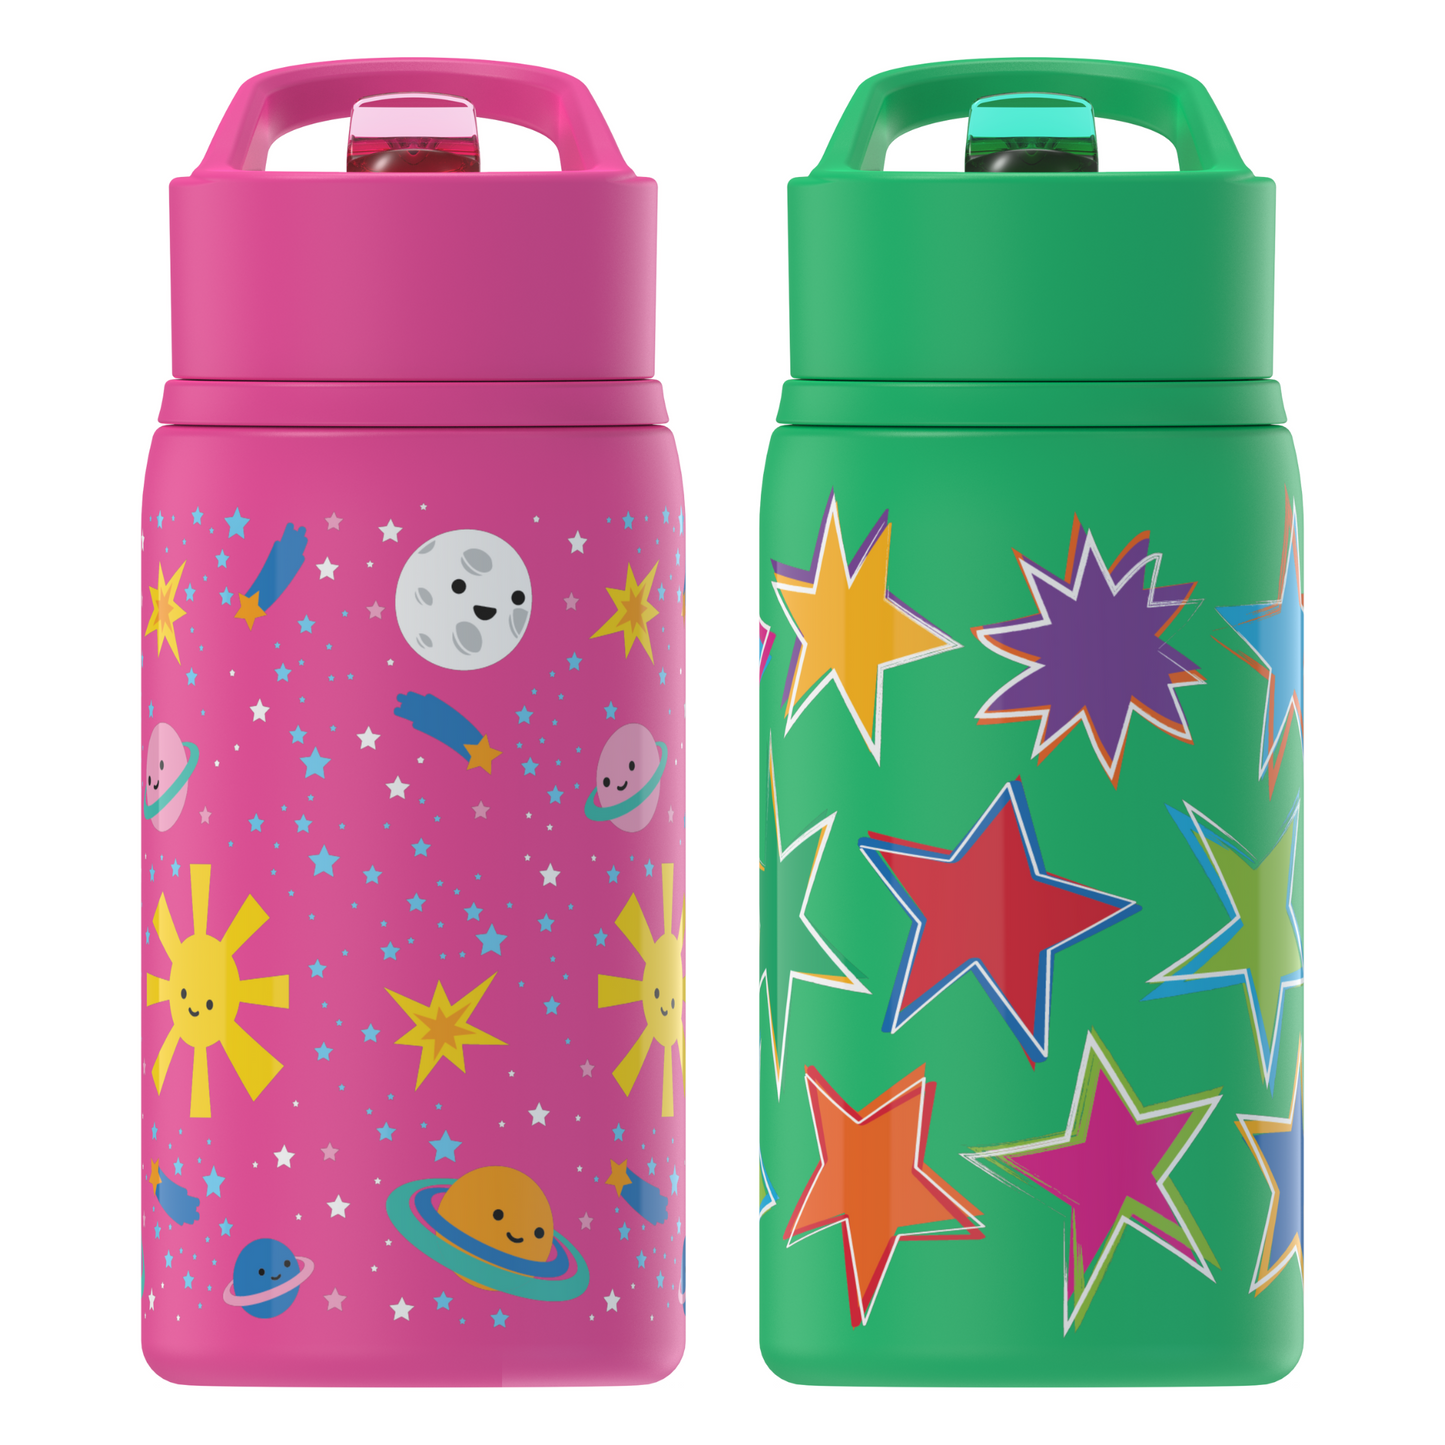 Cool Gear 2-Pack 18 oz Mashpee Kids Stainless Steel Water Bottle With Sipper Straw & Carrying Loop | Eco-Friendly, Wide Mouth, Leakproof for Kids, School, Gifts